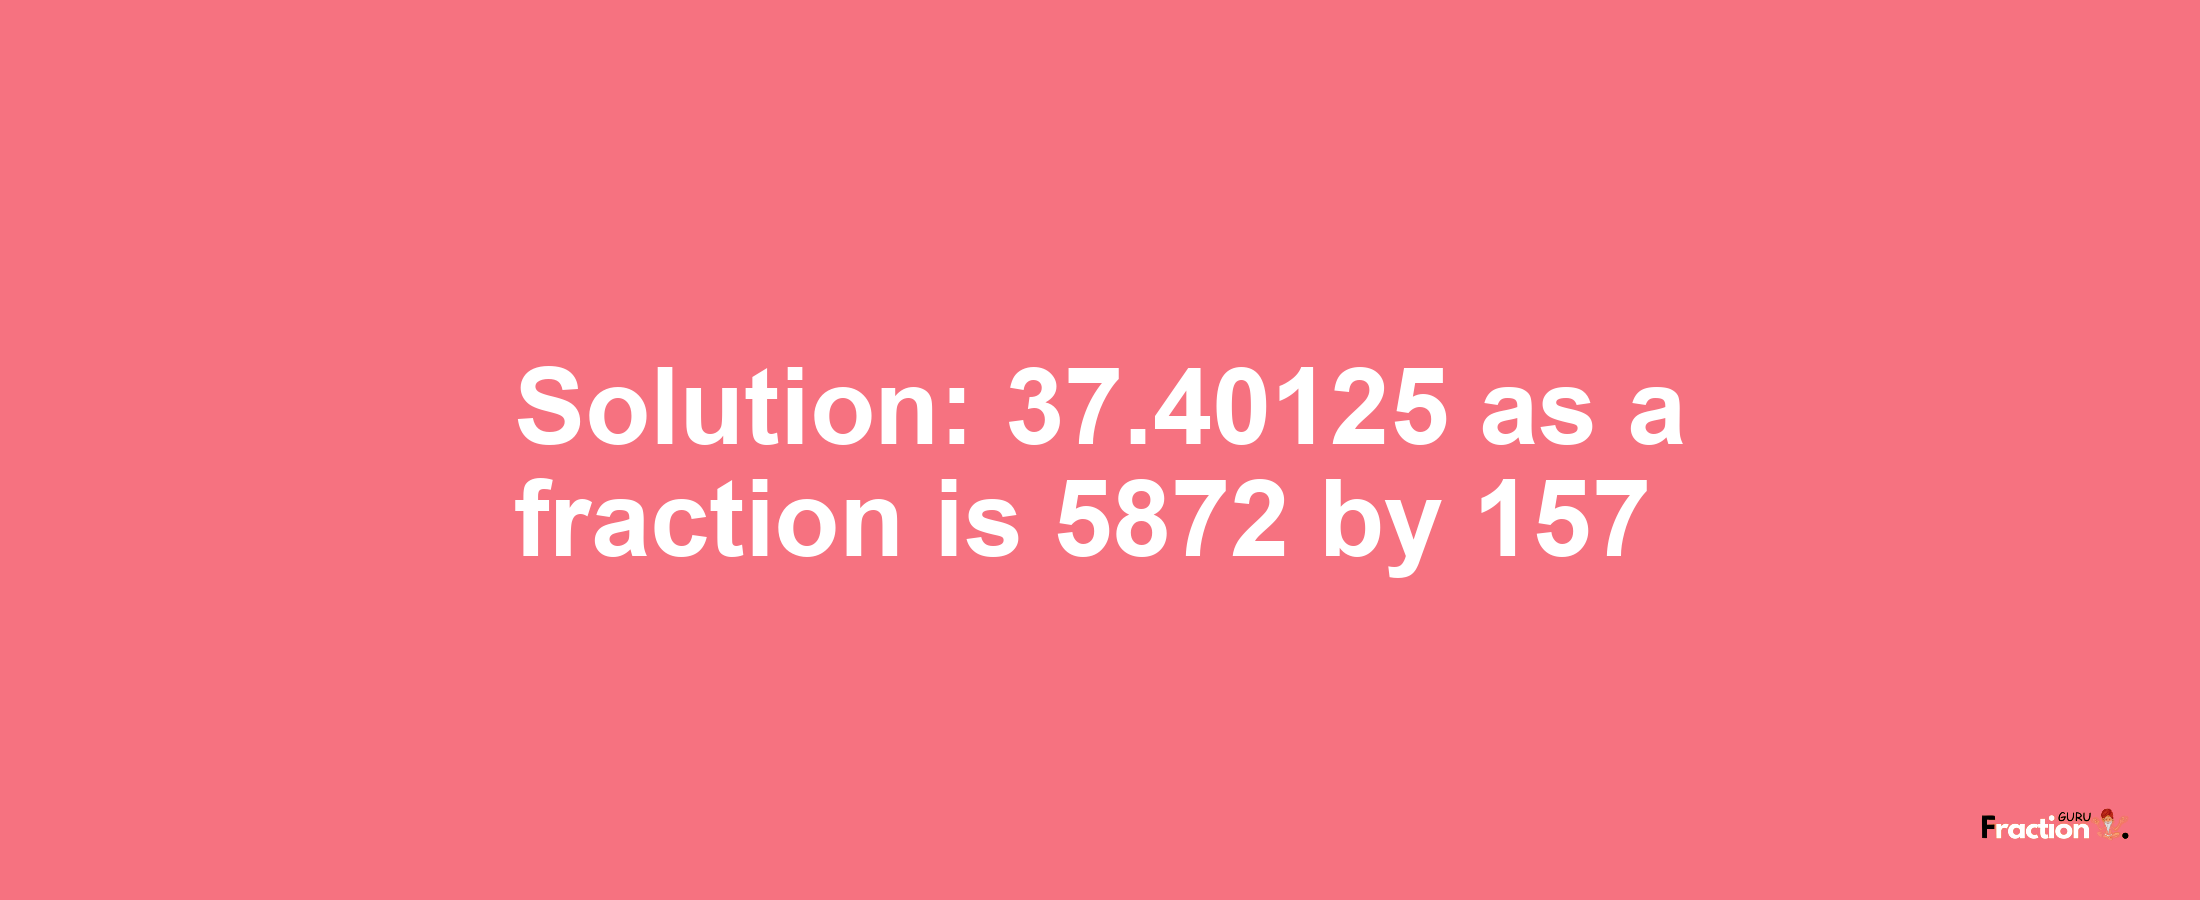 Solution:37.40125 as a fraction is 5872/157